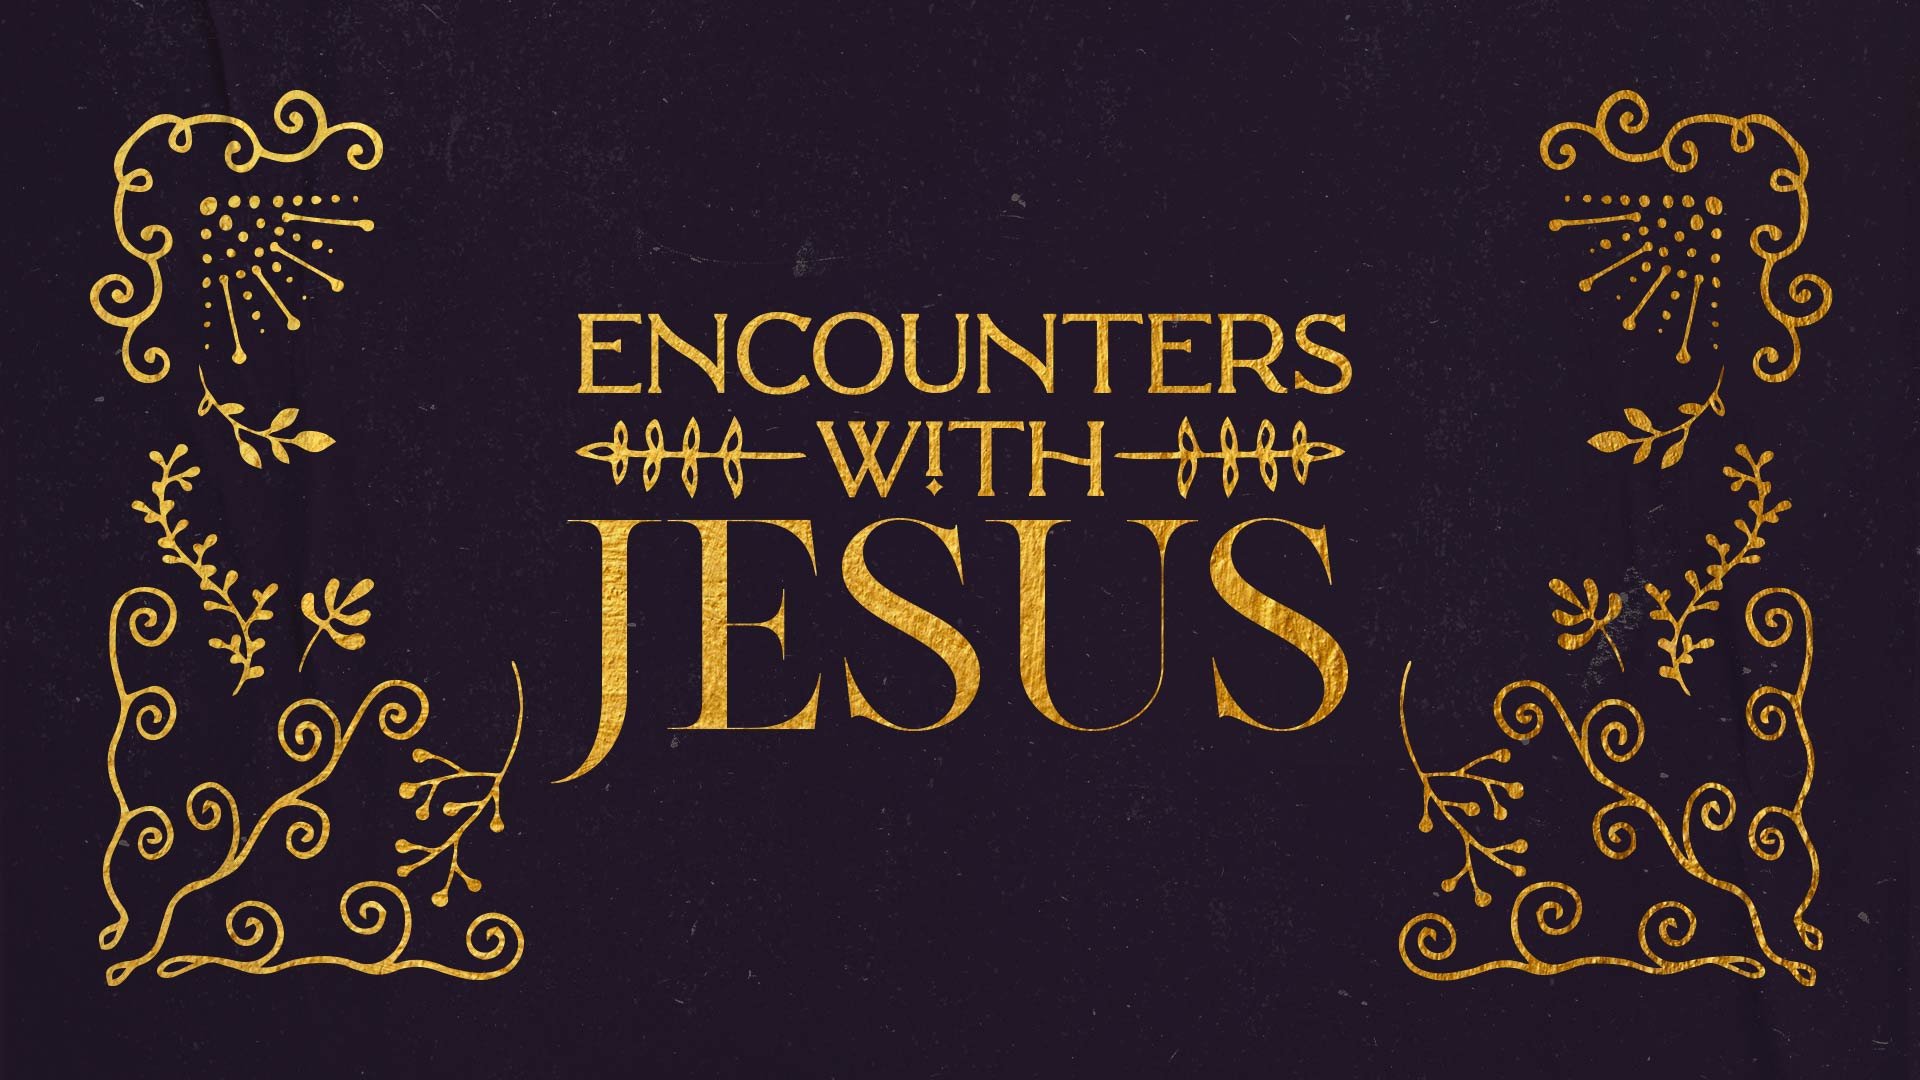      Encounters with Jesus